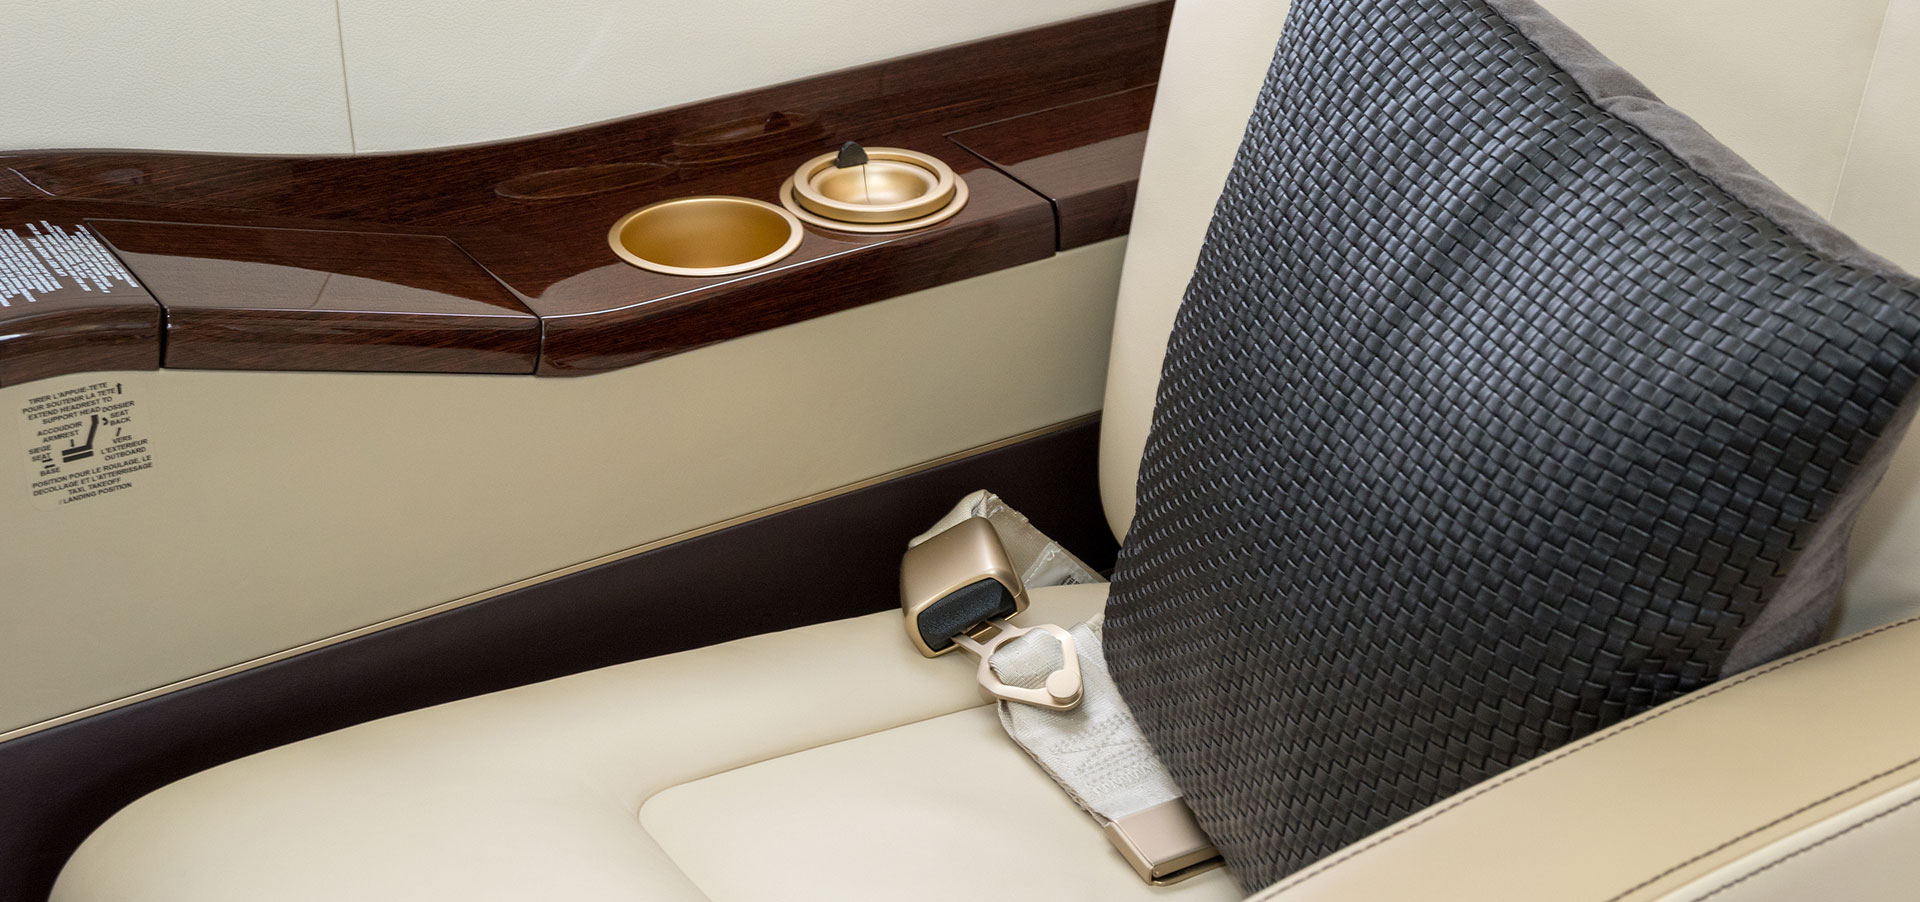 A woven pillow rests against a first-class airplane seat made of leather and polished wood with brushed gold fixtures